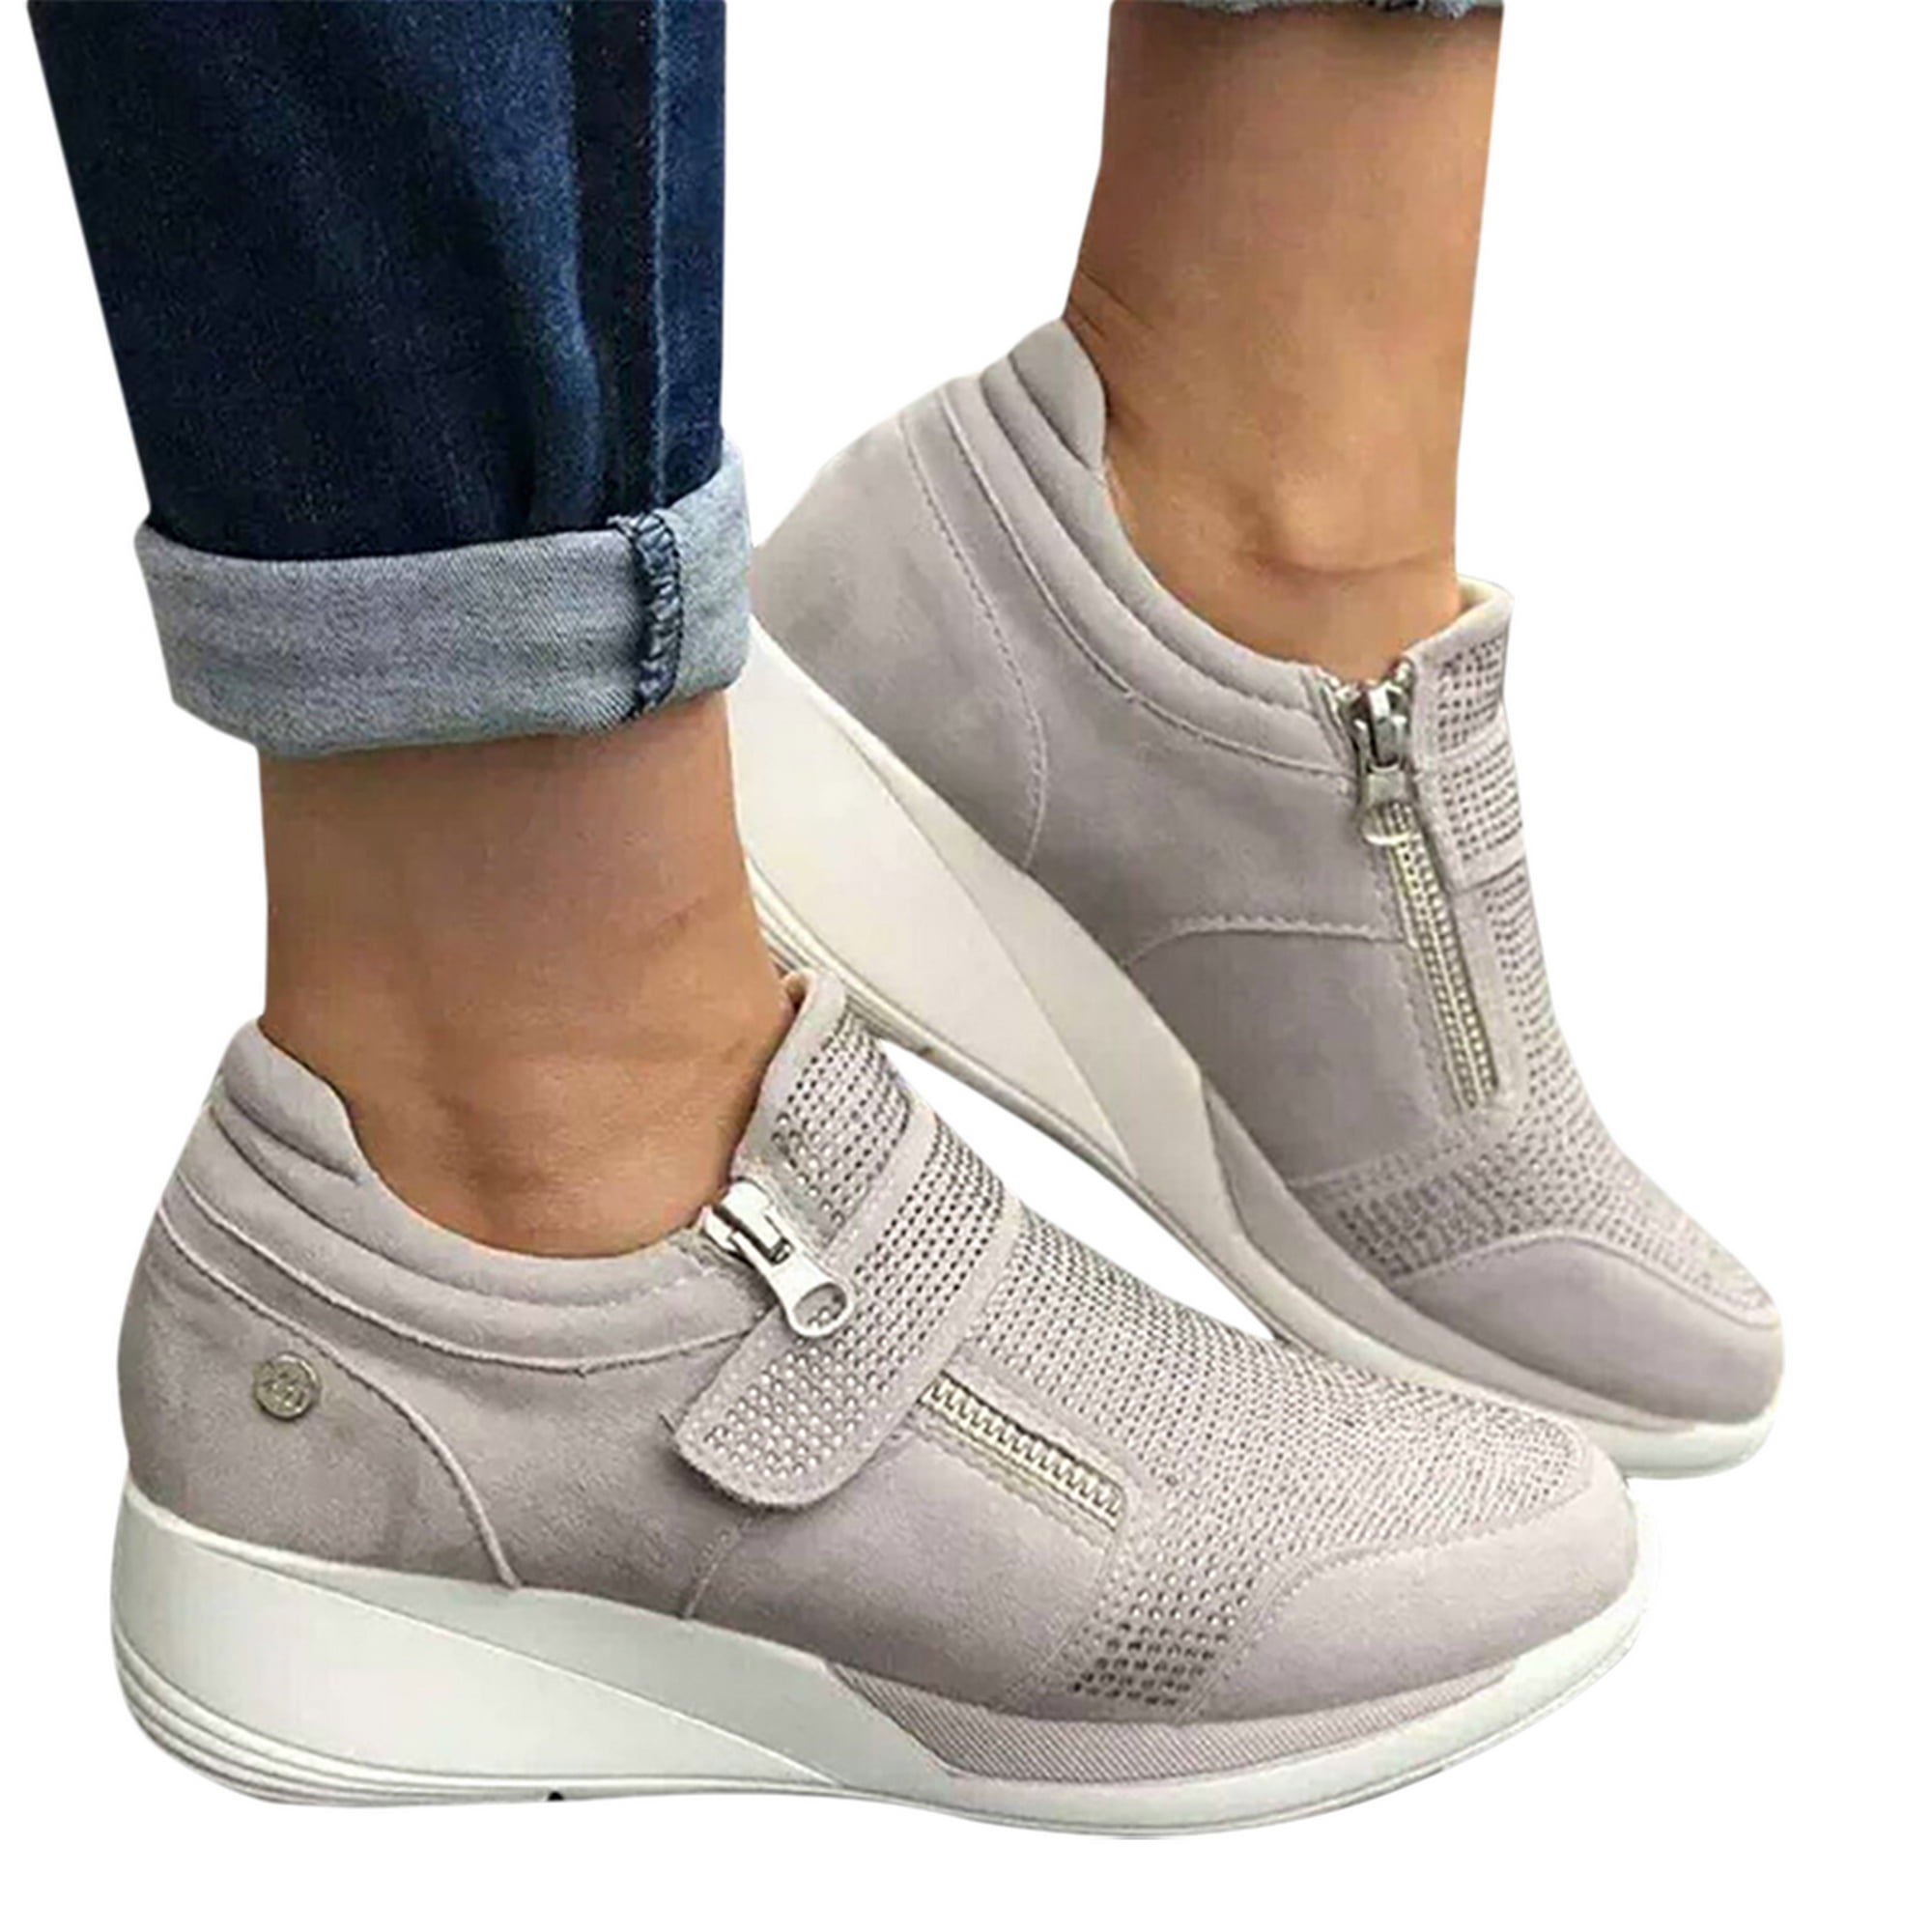 YiYLunneo Womens Platform Wedges Tennis Walking Sneakers High Heel Fitness Shoes Soft Thick Bottom Rocking Shoe Sneakers